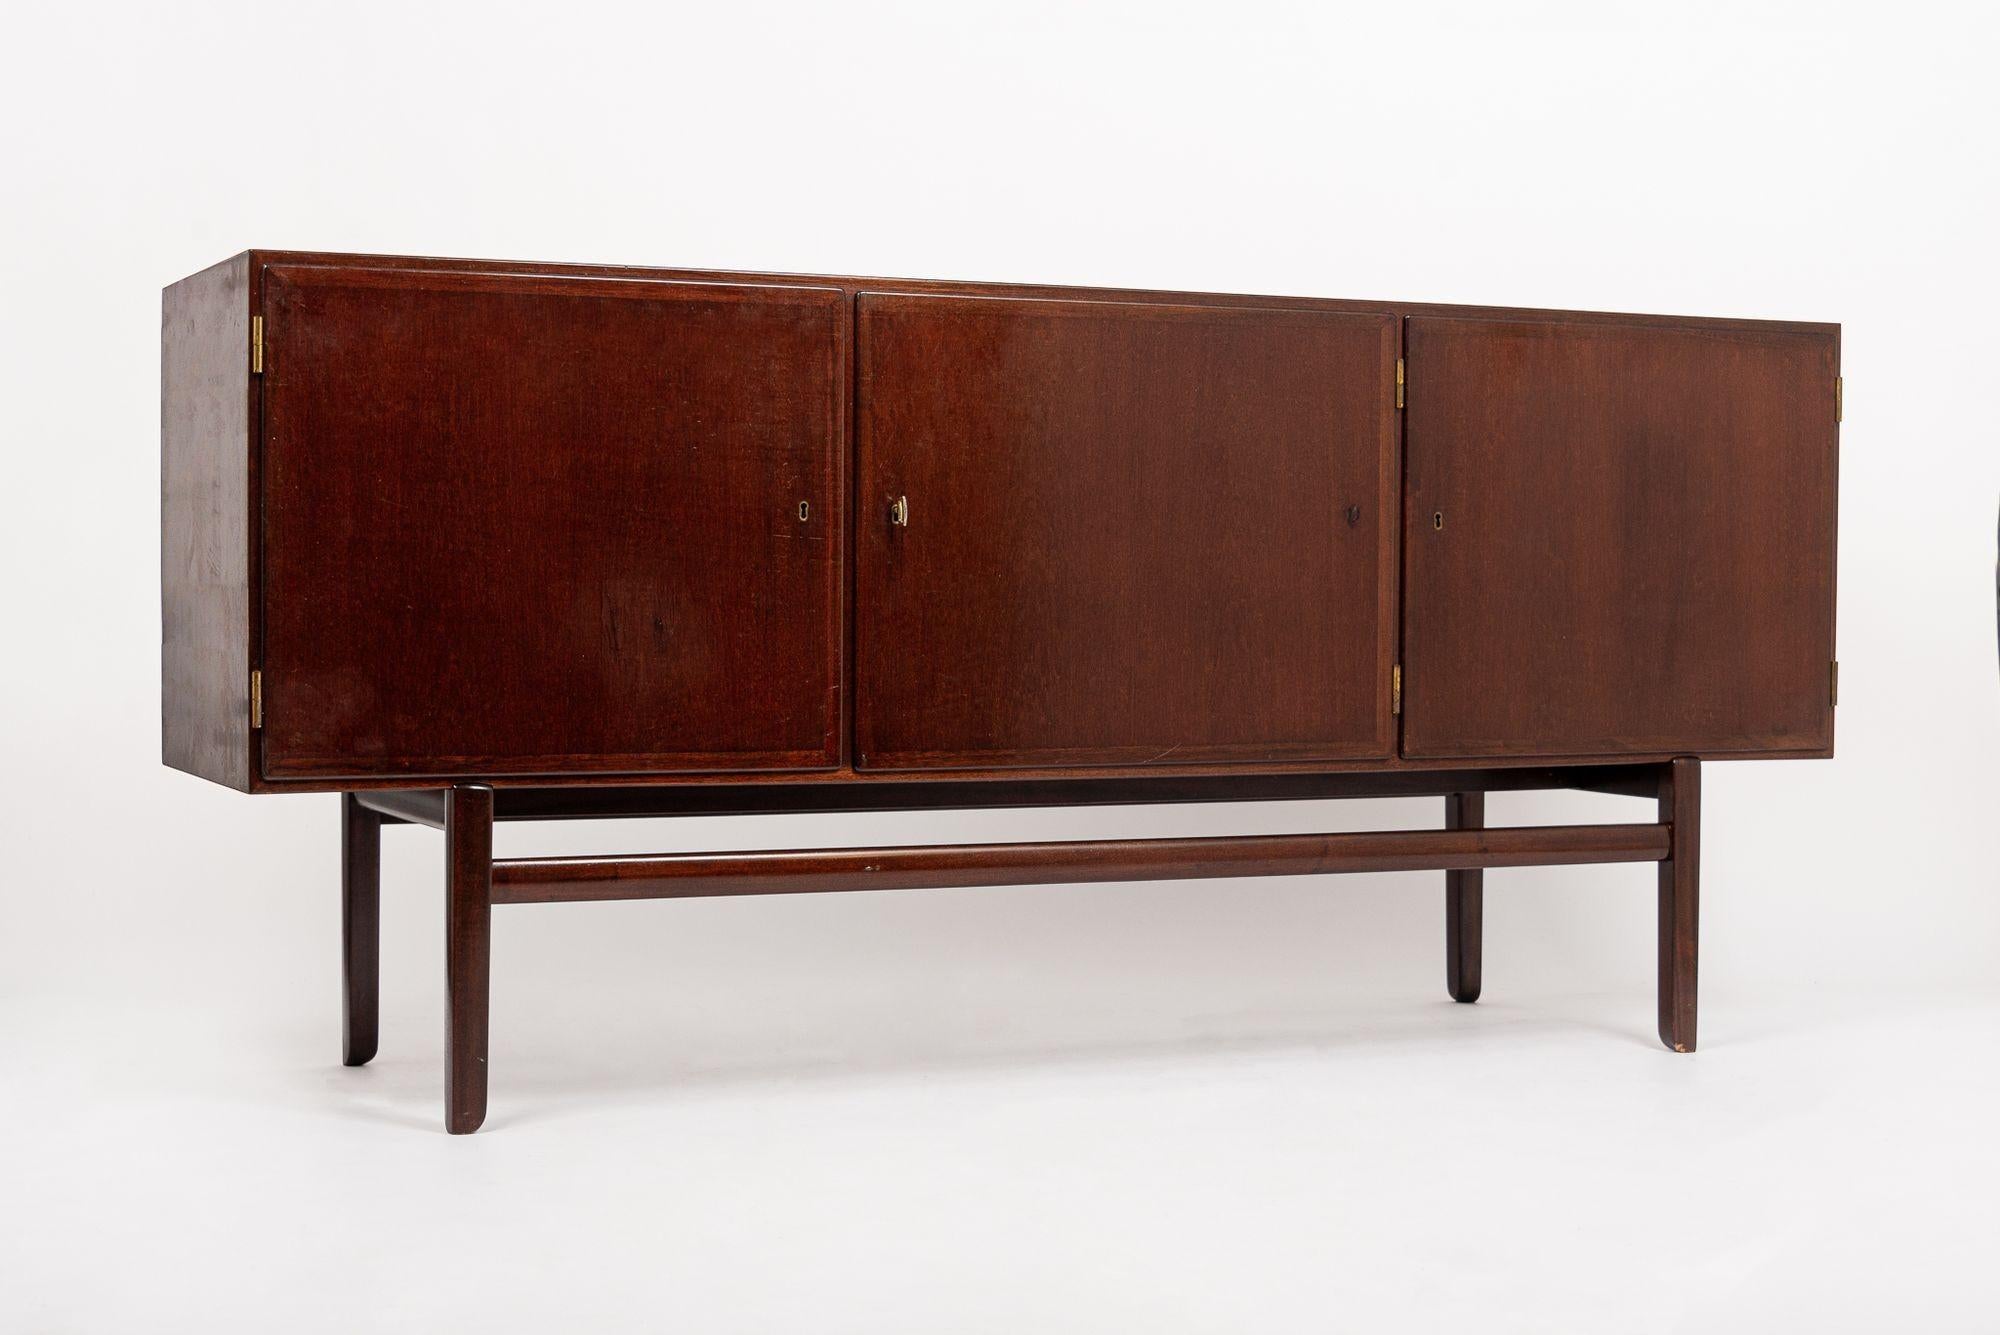 This iconic vintage mid century credenza modern credenza or sideboard cabinet designed by Ole Wanscher and produced by Poul Jeppesen Furniture was made in Denmark circa 1960. This “Rungstedlund” sideboard from the Rungstedlund dining collection was